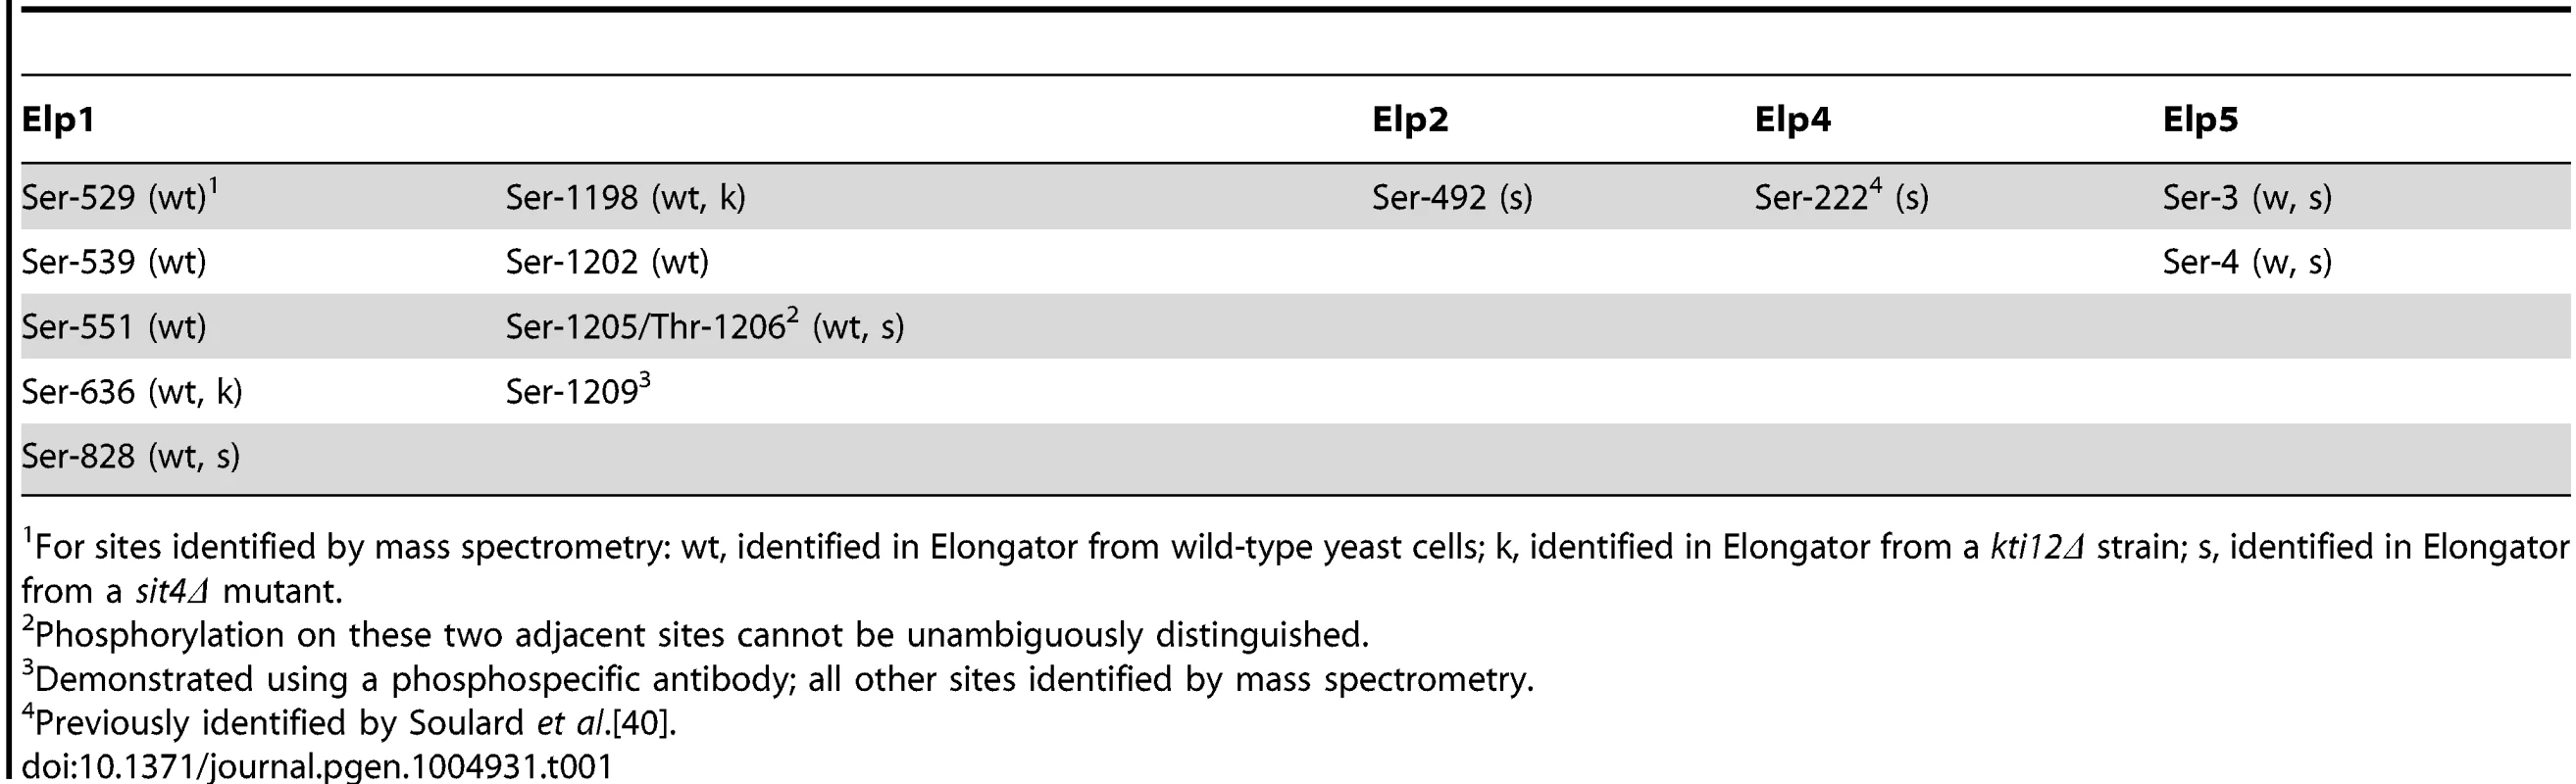 Summary of phosphorylation sites identified in Elp1 and other Elongator subunits.